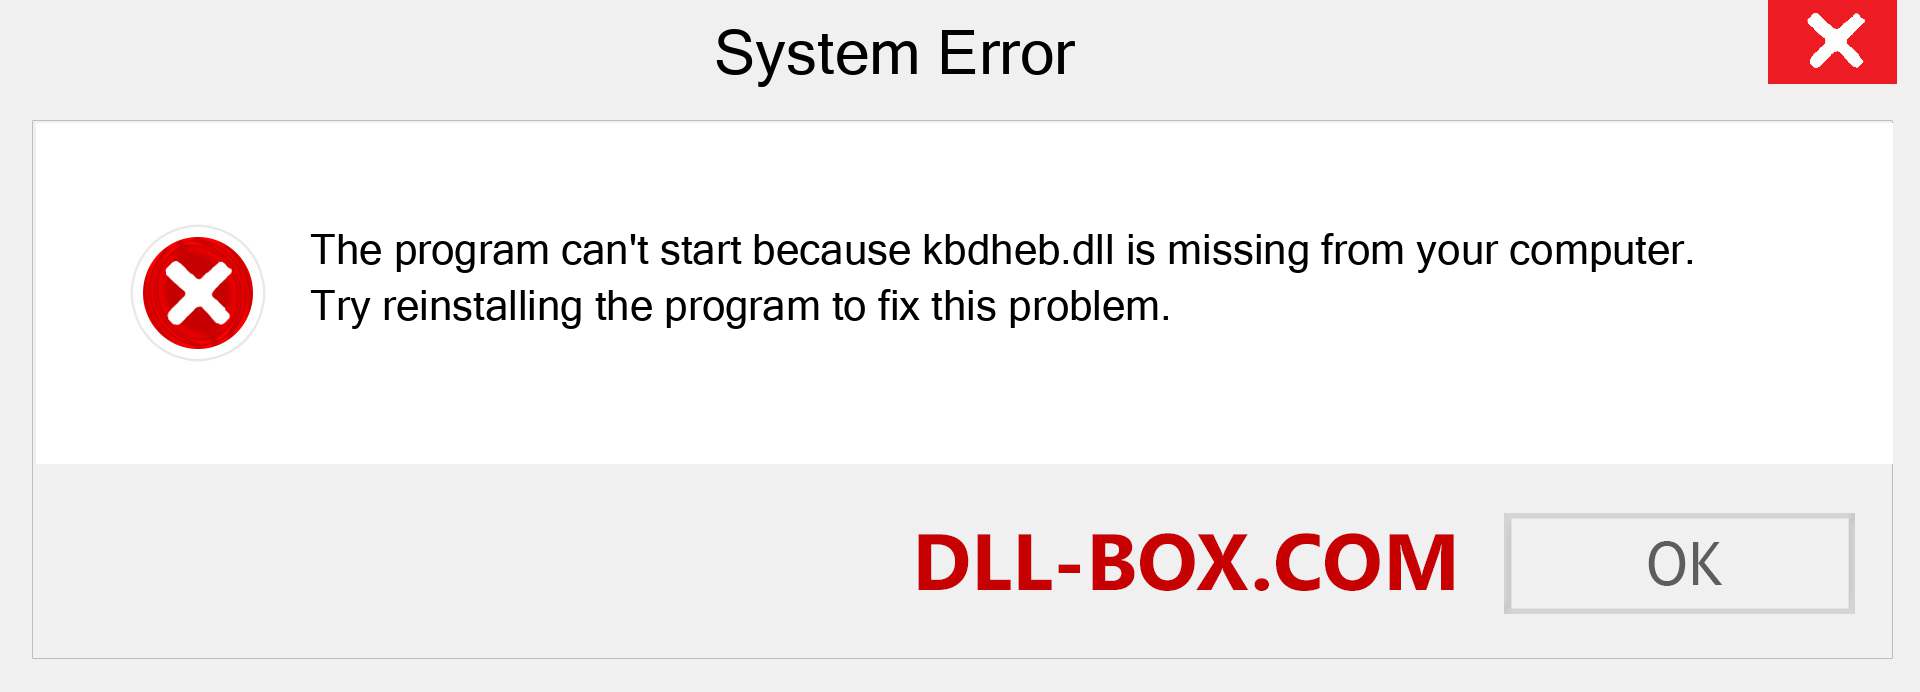  kbdheb.dll file is missing?. Download for Windows 7, 8, 10 - Fix  kbdheb dll Missing Error on Windows, photos, images